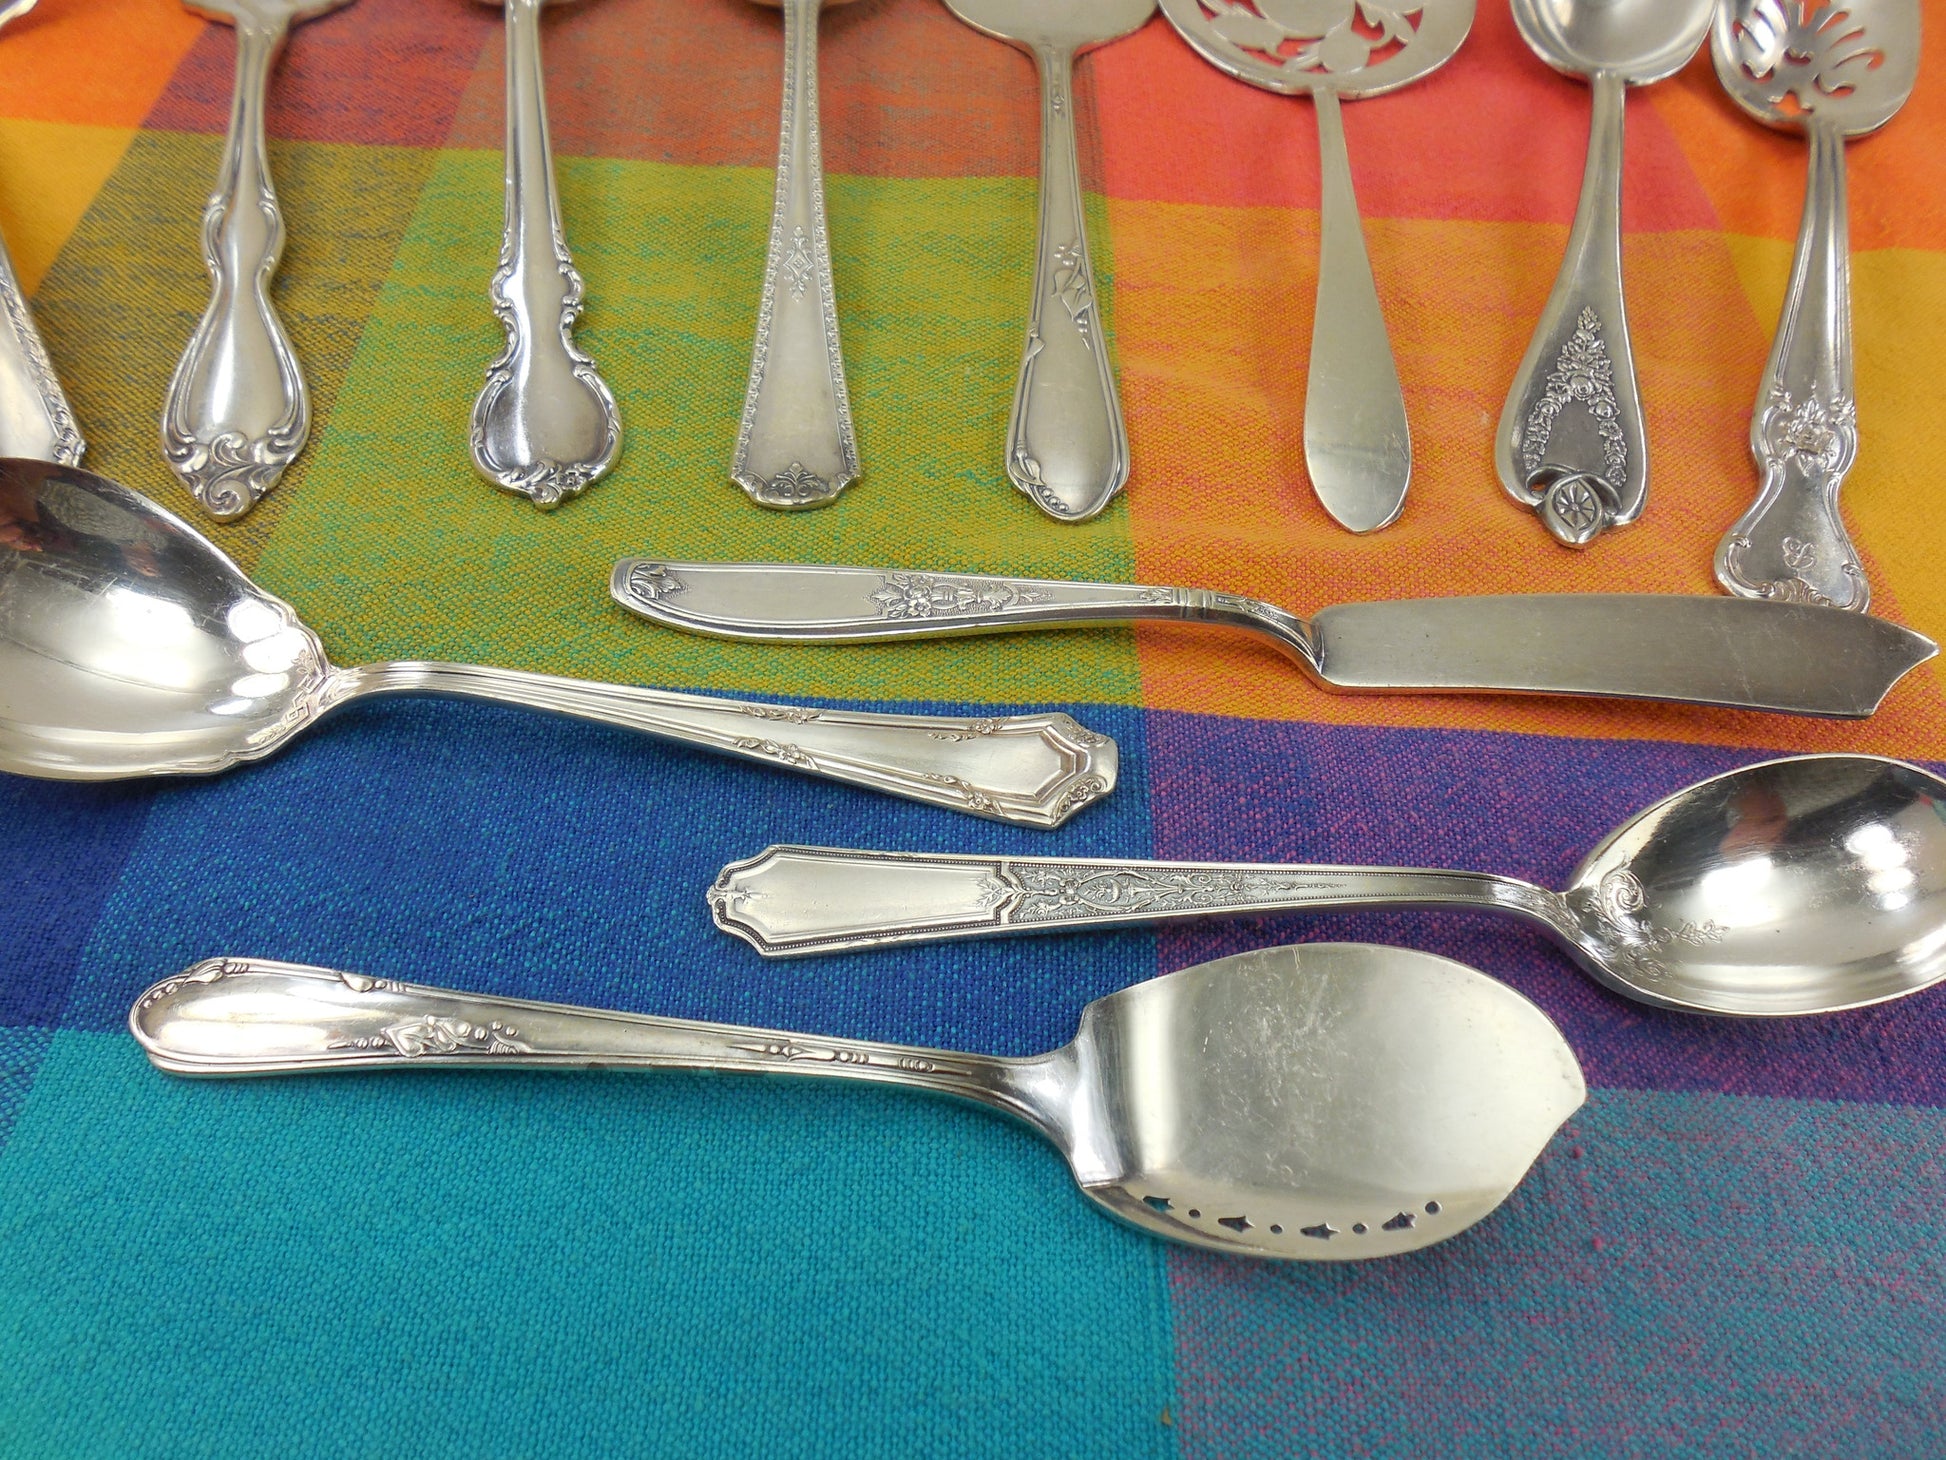 12 Piece Mismatched Serving Set - Cottage Chic Floral Traditional Edwardian Silverplate Flatware... Antique Silverware... master butter